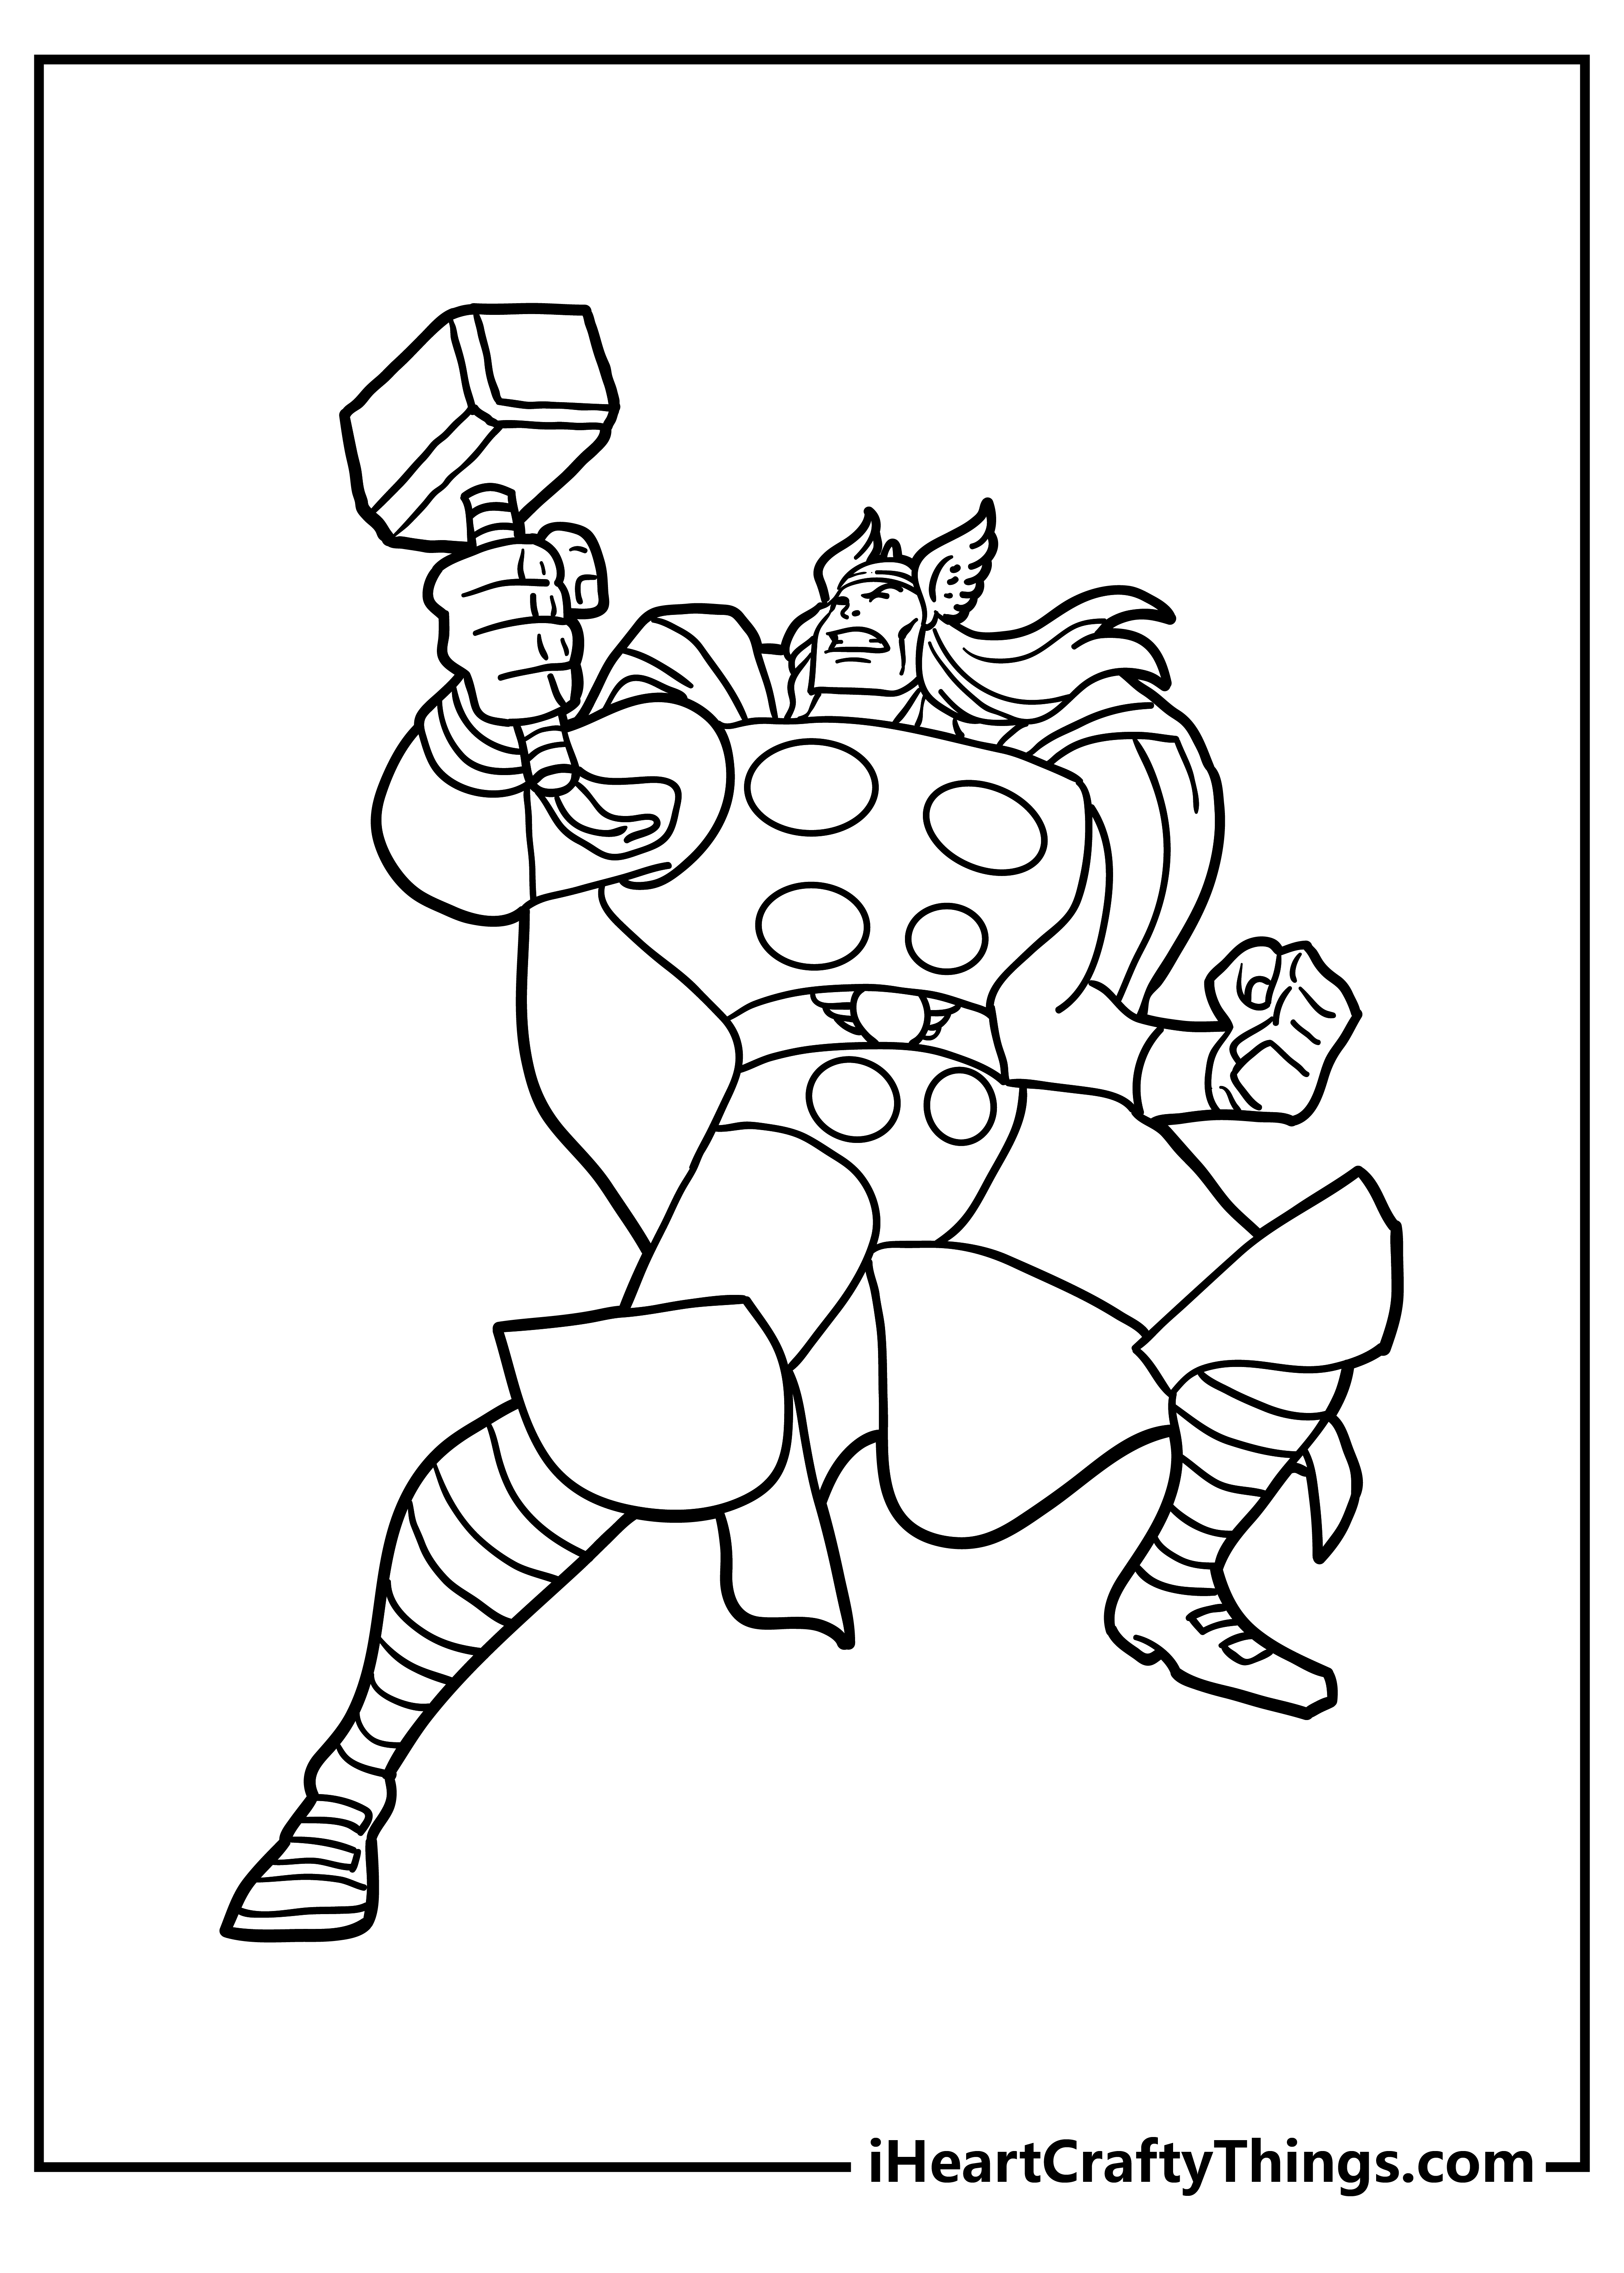 Avengers Coloring Pages free pdf download